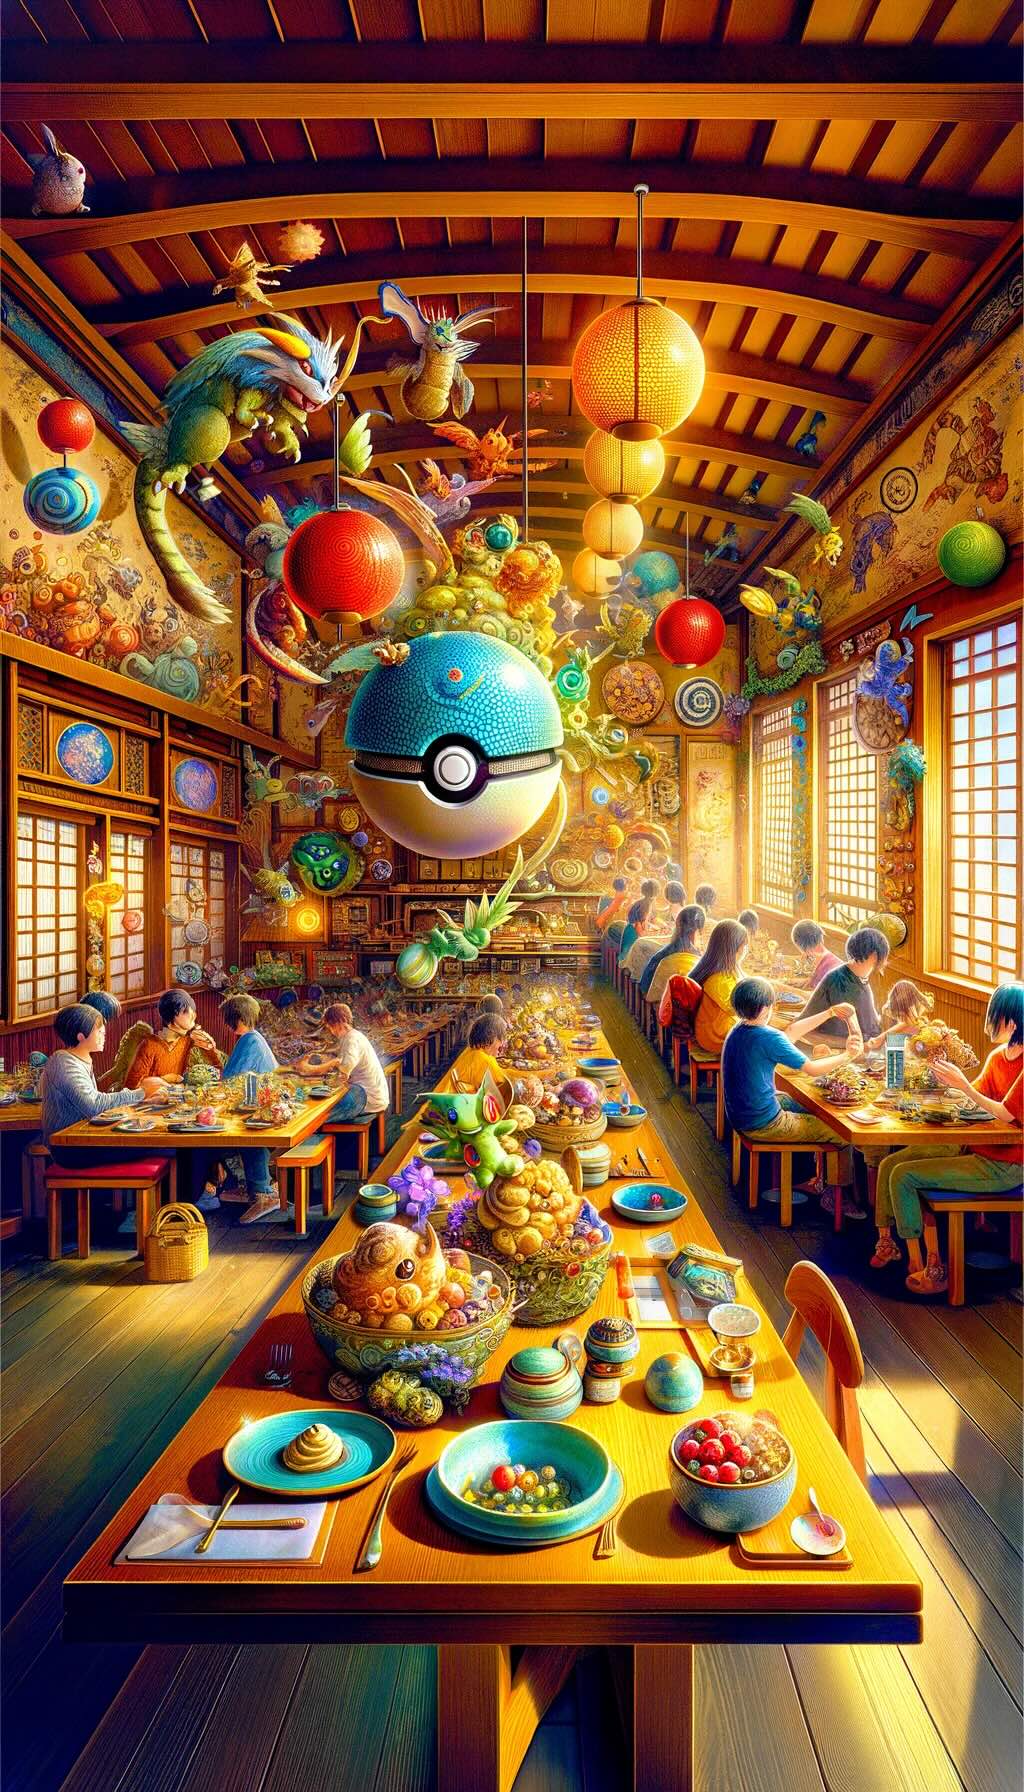 Fantasy-themed cafe inspired by a popular monster-catching video game series vividly captures the vibrant atmosphere of the cafe, with patrons enjoying whimsical, game-inspired dishes and desserts in a setting filled with adventurous motifs and decorations